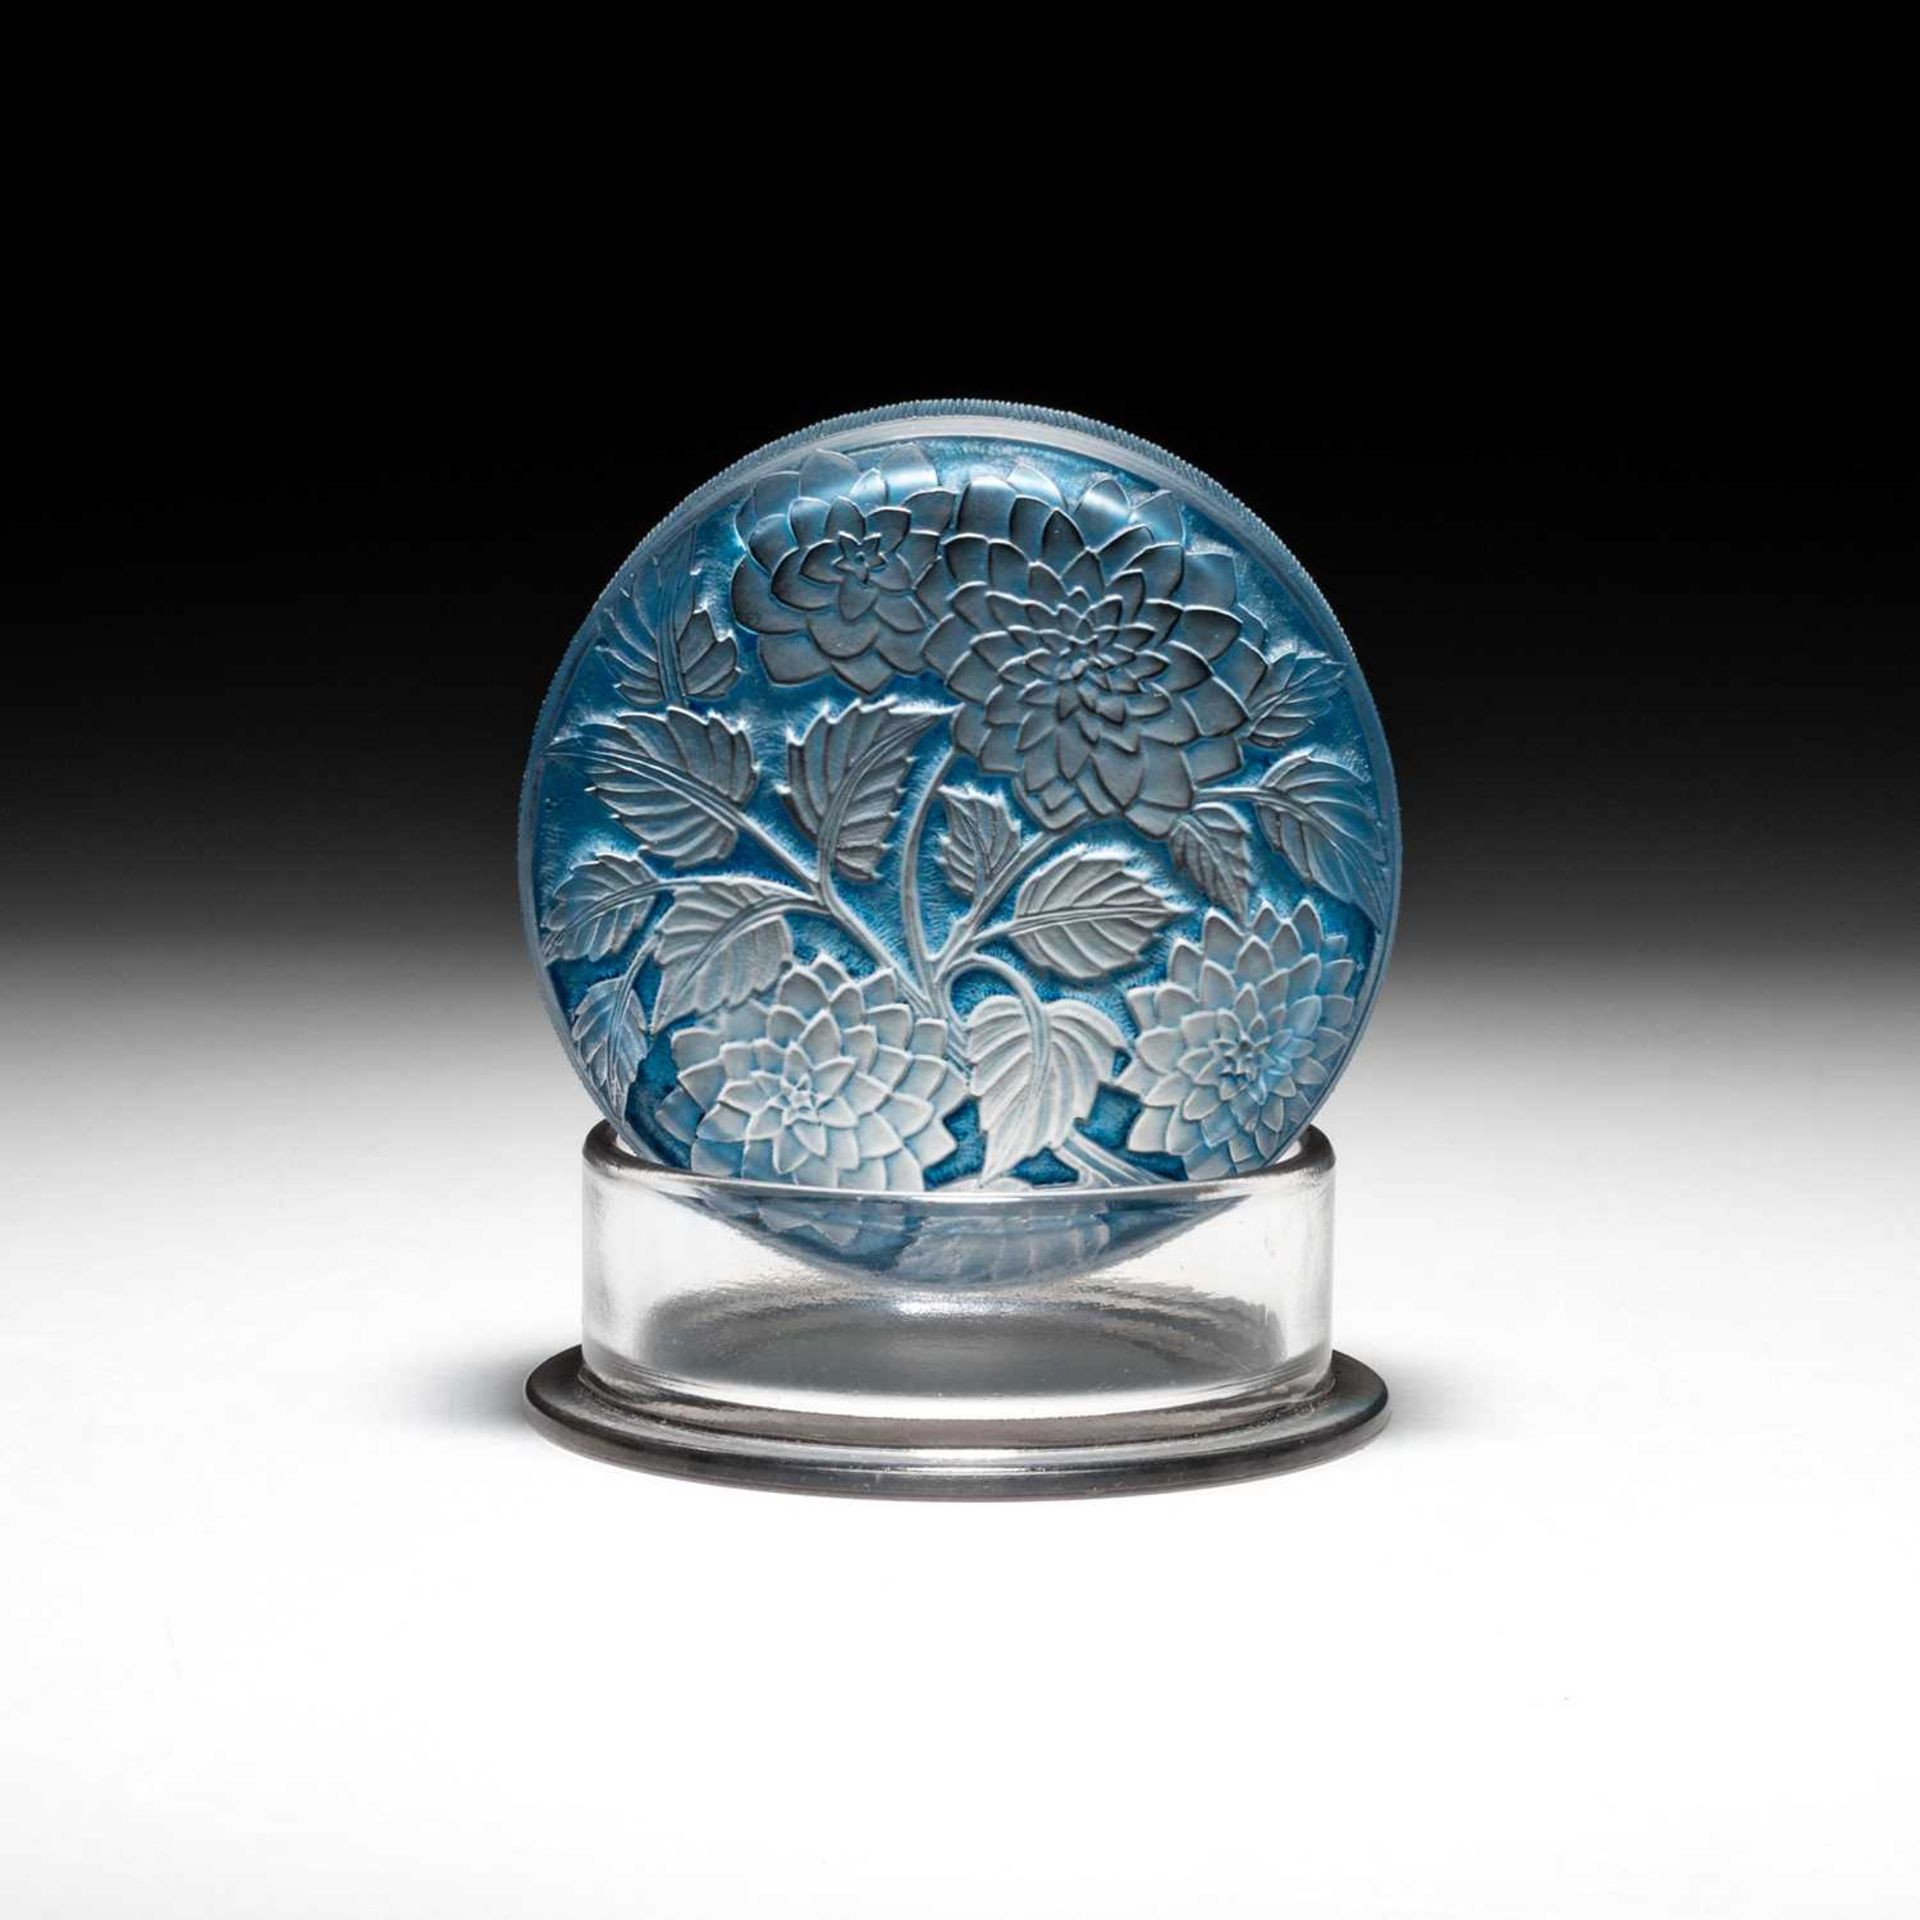 RENÉ LALIQUE (FRENCH, 1860-1945), A 'MEUDON' BOX AND COVER, DESIGNED 1924 - Image 2 of 2